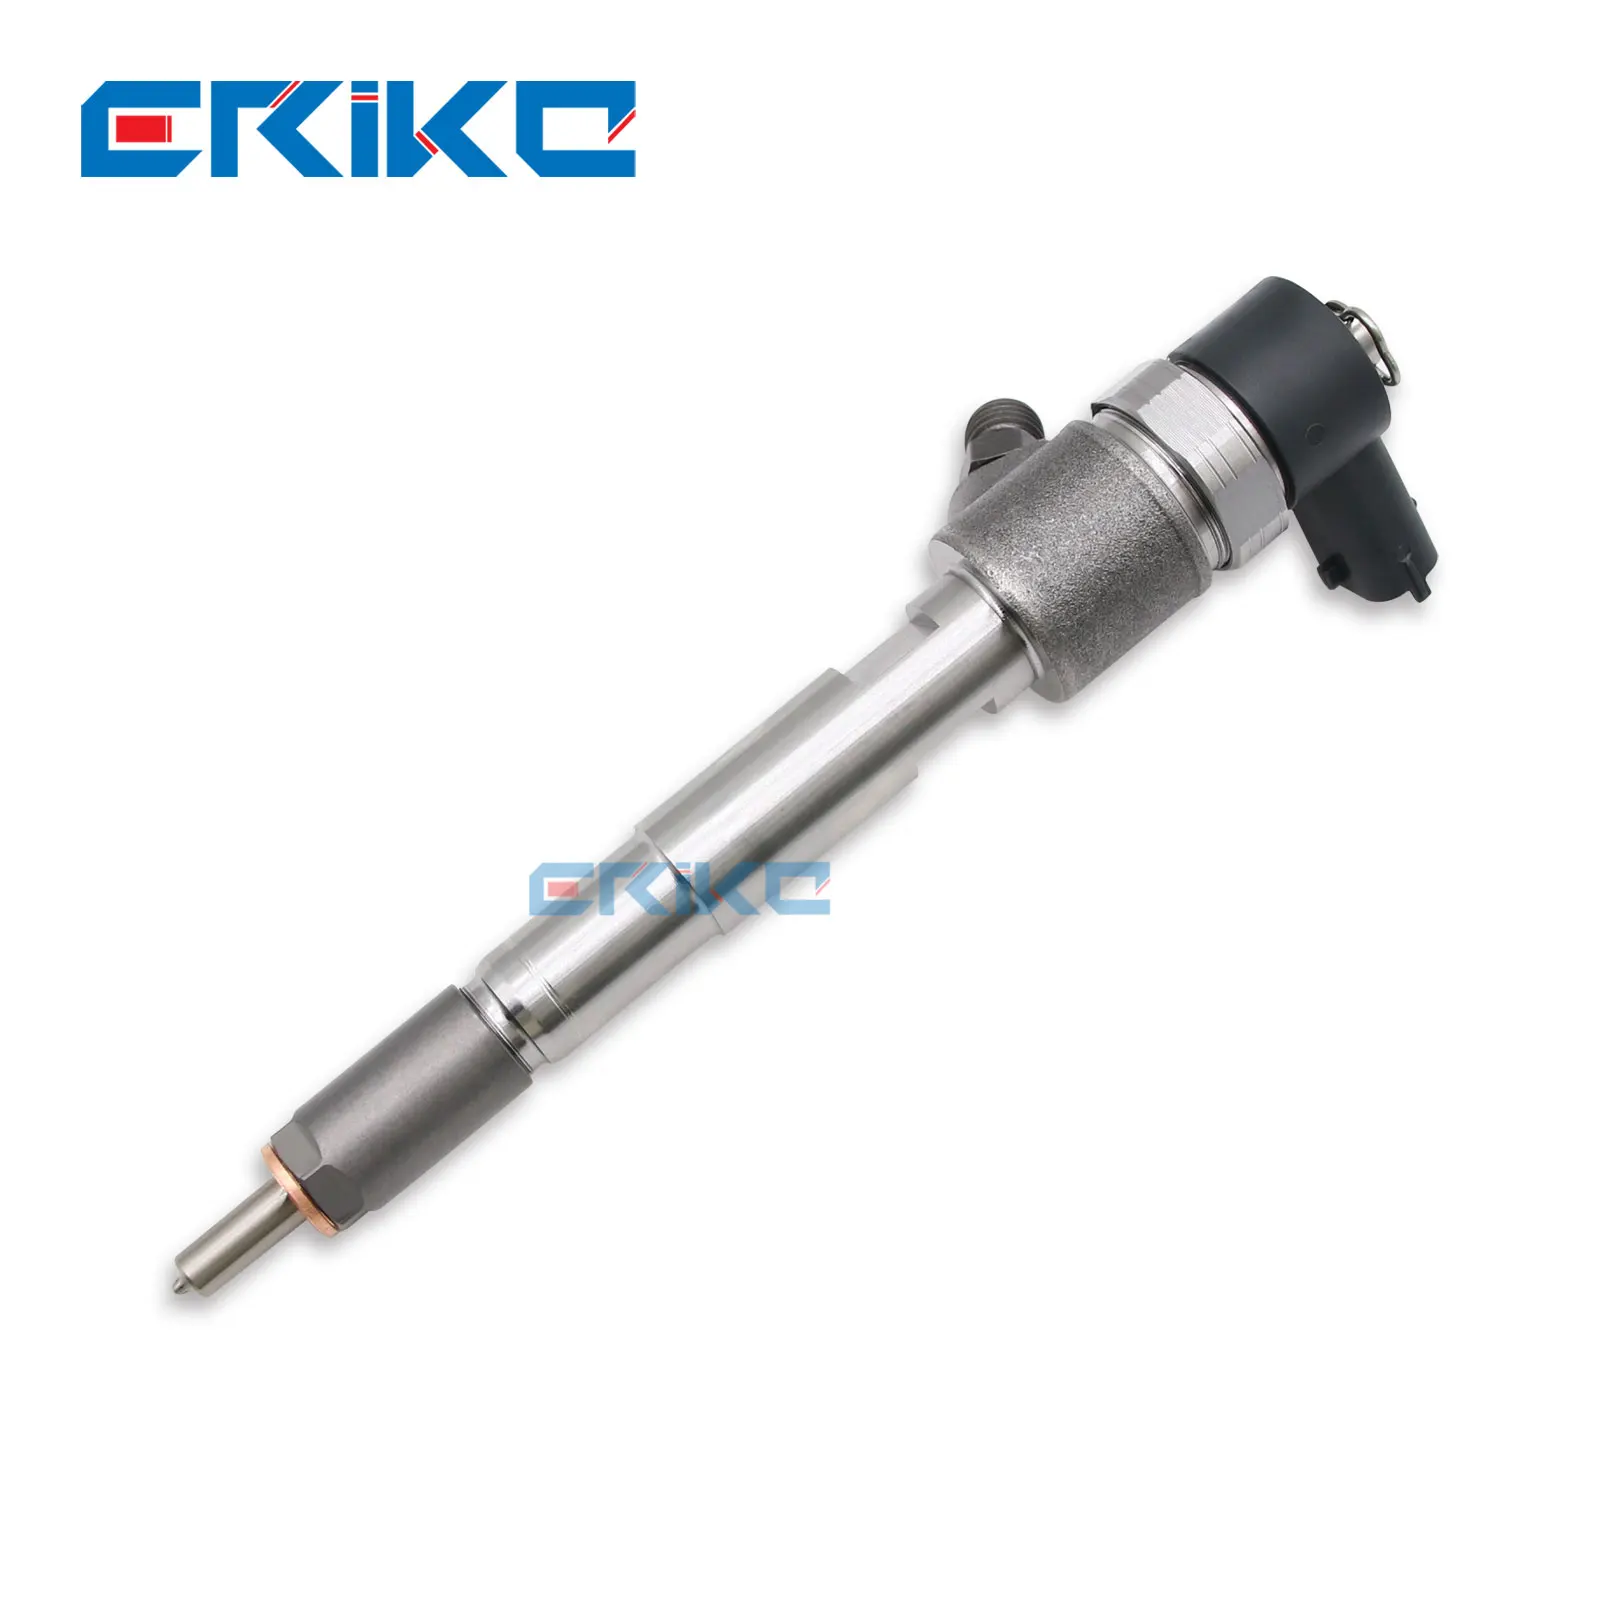 

0445110832 Fuel injector CRDI injector Auto Engine Injection 0 445 110 832 Diesel Engine Parts Nozzle 0445 110 832 for Bosch